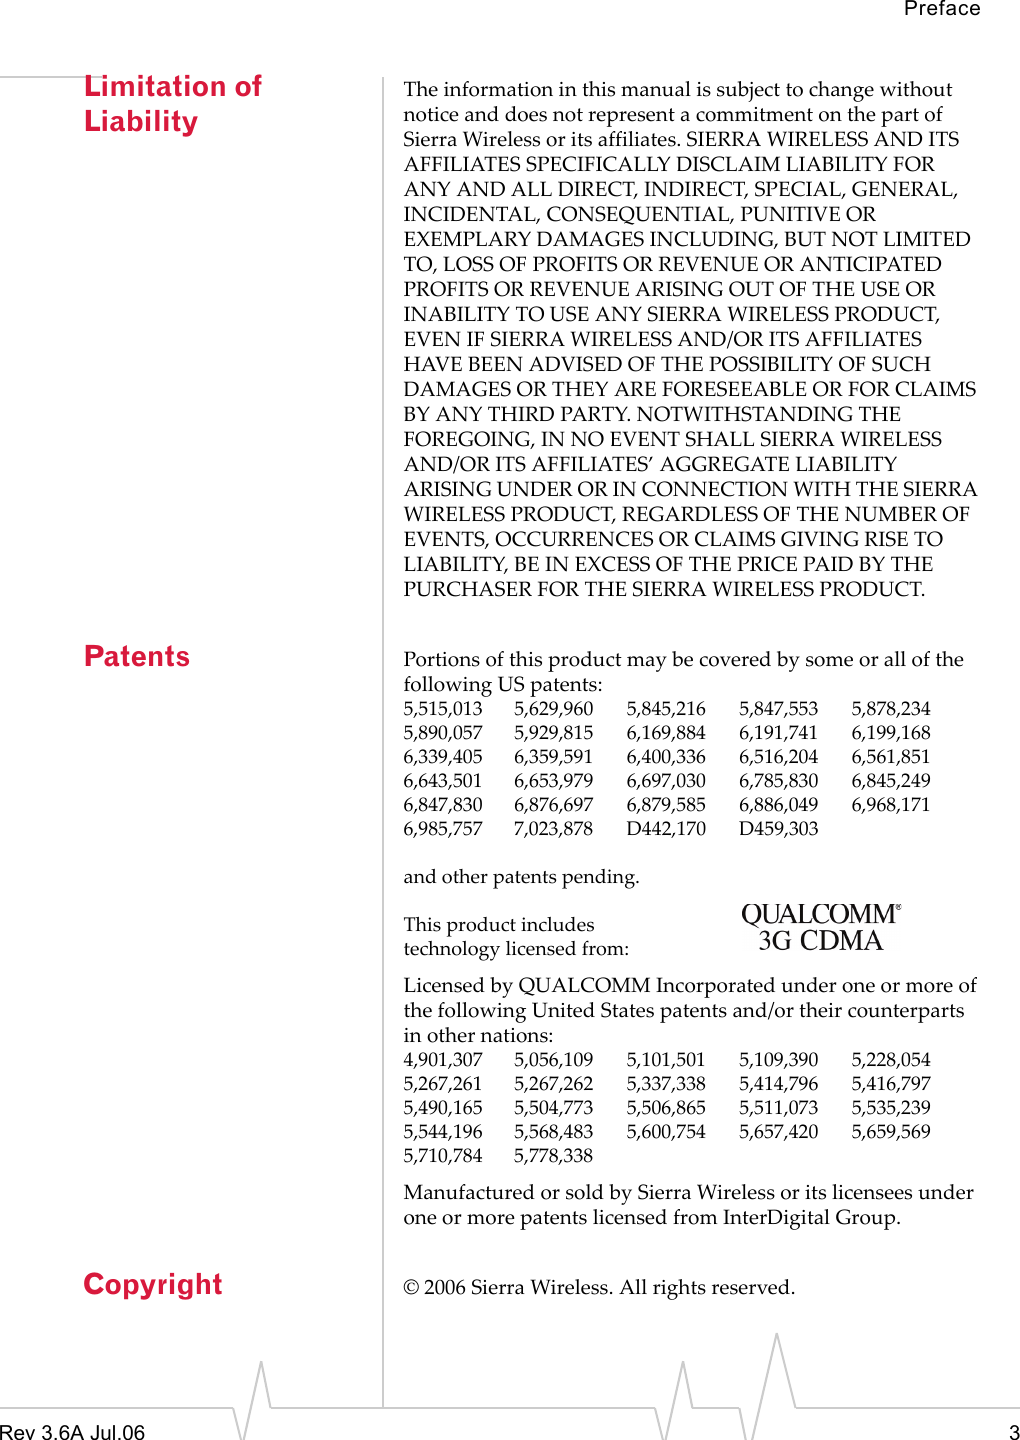 PrefaceRev 3.6A Jul.06 3Limitation of LiabilityThe information in this manual is subject to change without notice and does not represent a commitment on the part of Sierra Wireless or its affiliates. SIERRA WIRELESS AND ITS AFFILIATES SPECIFICALLY DISCLAIM LIABILITY FOR ANY AND ALL DIRECT, INDIRECT, SPECIAL, GENERAL, INCIDENTAL, CONSEQUENTIAL, PUNITIVE OR EXEMPLARY DAMAGES INCLUDING, BUT NOT LIMITED TO, LOSS OF PROFITS OR REVENUE OR ANTICIPATED PROFITS OR REVENUE ARISING OUT OF THE USE OR INABILITY TO USE ANY SIERRA WIRELESS PRODUCT, EVEN IF SIERRA WIRELESS AND/OR ITS AFFILIATES HAVE BEEN ADVISED OF THE POSSIBILITY OF SUCH DAMAGES OR THEY ARE FORESEEABLE OR FOR CLAIMS BY ANY THIRD PARTY. NOTWITHSTANDING THE FOREGOING, IN NO EVENT SHALL SIERRA WIRELESS AND/OR ITS AFFILIATES’ AGGREGATE LIABILITY ARISING UNDER OR IN CONNECTION WITH THE SIERRA WIRELESS PRODUCT, REGARDLESS OF THE NUMBER OF EVENTS, OCCURRENCES OR CLAIMS GIVING RISE TO LIABILITY, BE IN EXCESS OF THE PRICE PAID BY THE PURCHASER FOR THE SIERRA WIRELESS PRODUCT.Patents Portions of this product may be covered by some or all of the following US patents:5,515,013 5,629,960 5,845,216 5,847,553 5,878,2345,890,057 5,929,815 6,169,884 6,191,741 6,199,1686,339,405 6,359,591 6,400,336 6,516,204 6,561,8516,643,501 6,653,979 6,697,030 6,785,830 6,845,2496,847,830 6,876,697 6,879,585 6,886,049 6,968,1716,985,757 7,023,878 D442,170 D459,303and other patents pending.This product includestechnology licensed from:Licensed by QUALCOMM Incorporated under one or more of the following United States patents and/or their counterparts in other nations:4,901,307 5,056,109 5,101,501 5,109,390 5,228,0545,267,261 5,267,262 5,337,338 5,414,796 5,416,7975,490,165 5,504,773 5,506,865 5,511,073 5,535,2395,544,196 5,568,483 5,600,754 5,657,420 5,659,5695,710,784 5,778,338Manufactured or sold by Sierra Wireless or its licensees under one or more patents licensed from InterDigital Group.Copyright © 2006 Sierra Wireless. All rights reserved.